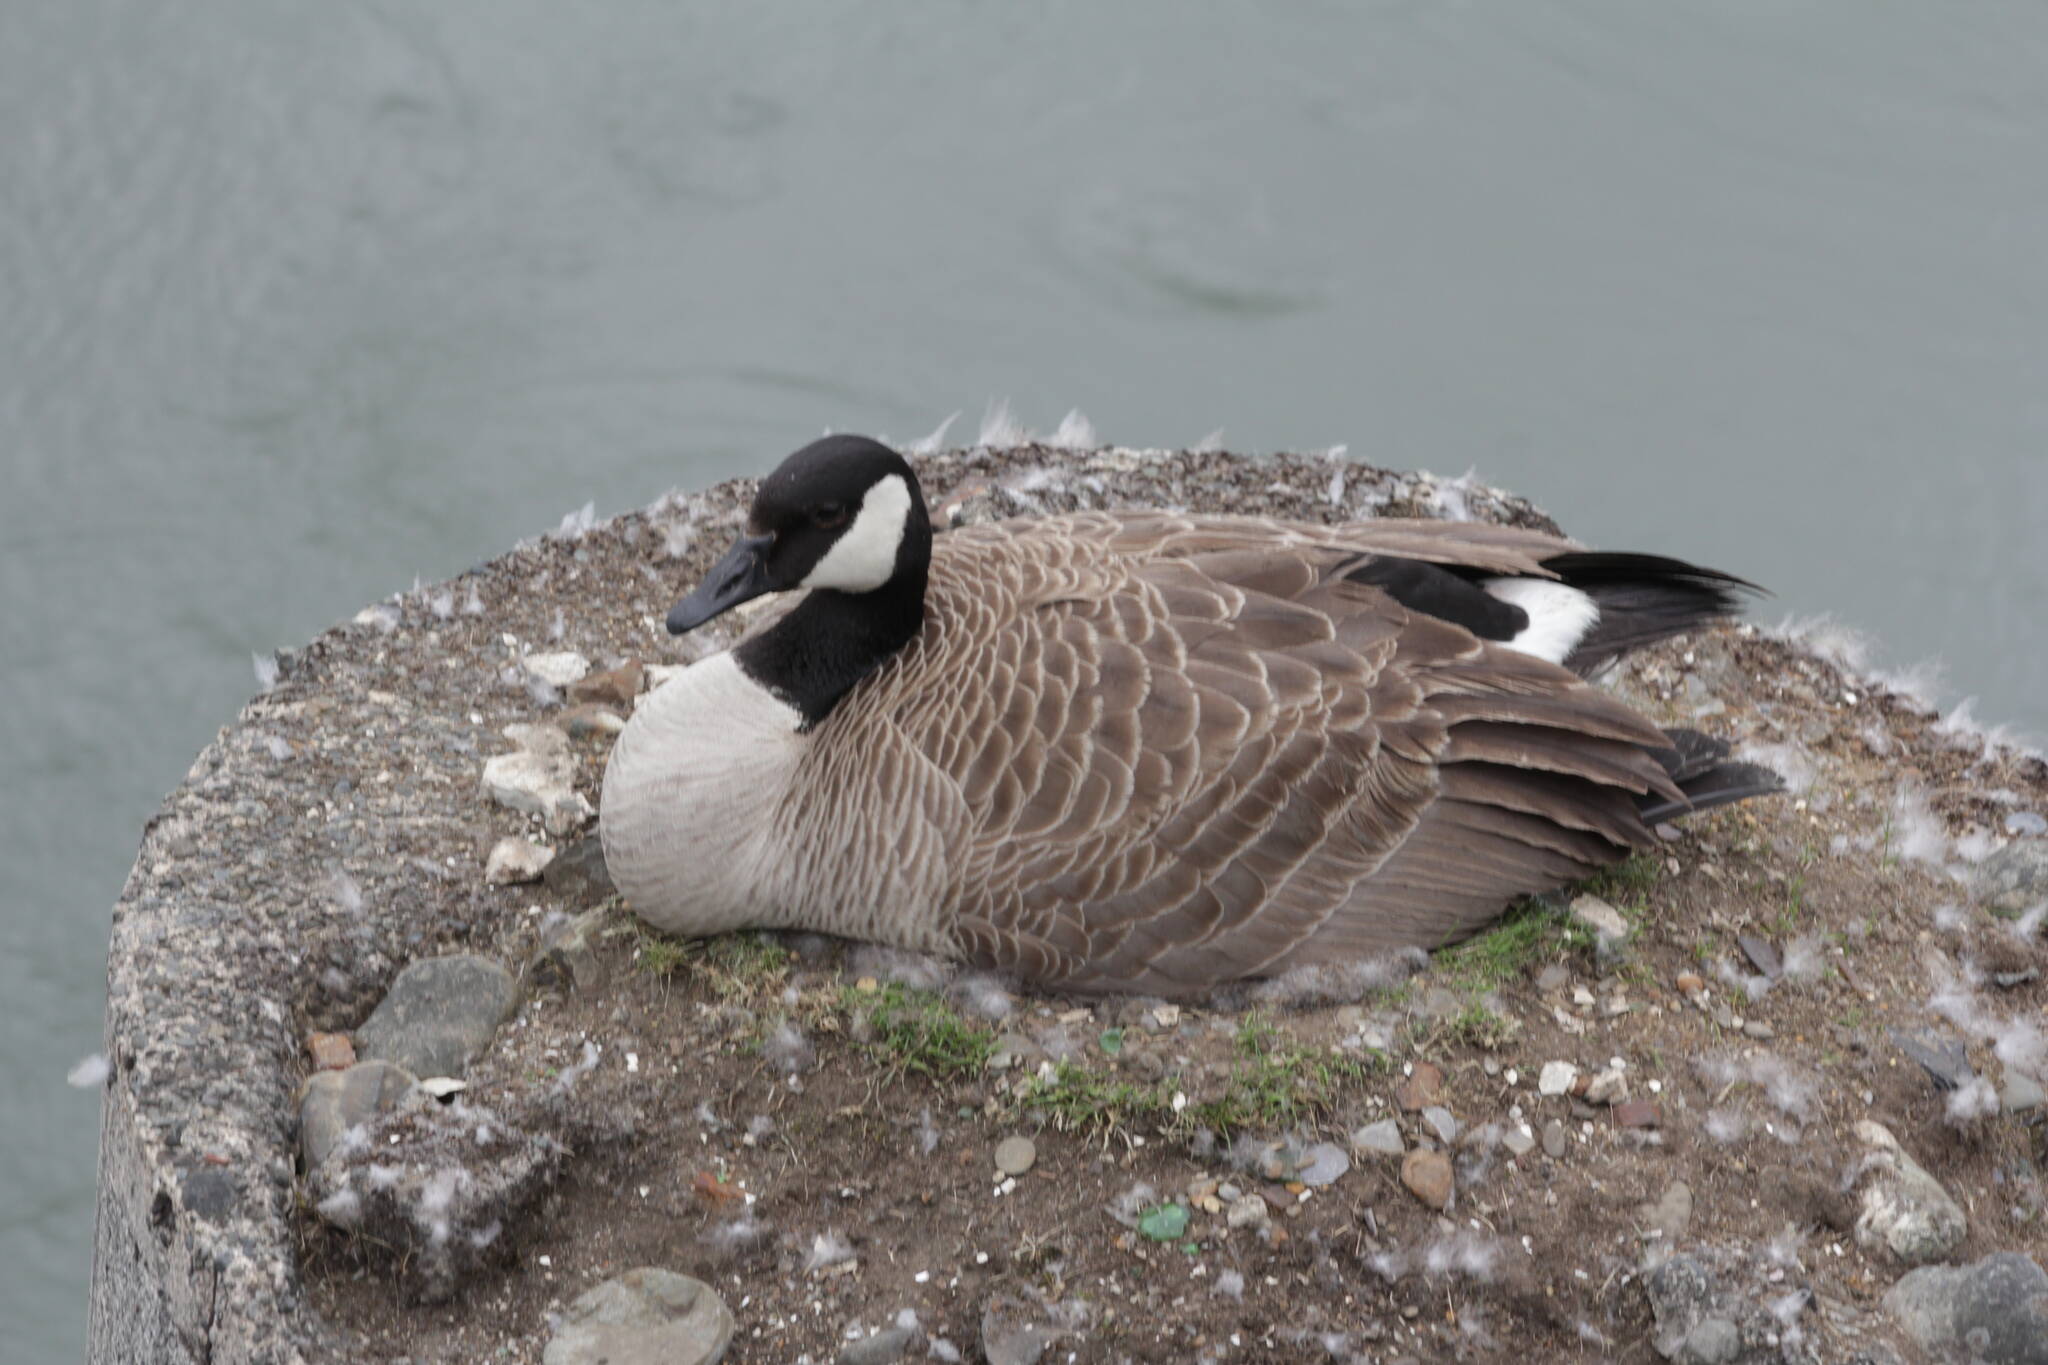 Michael S. Lockett / The Daily World
A Canada goose nests on a piling near the Heron Street Bridge on May 16.